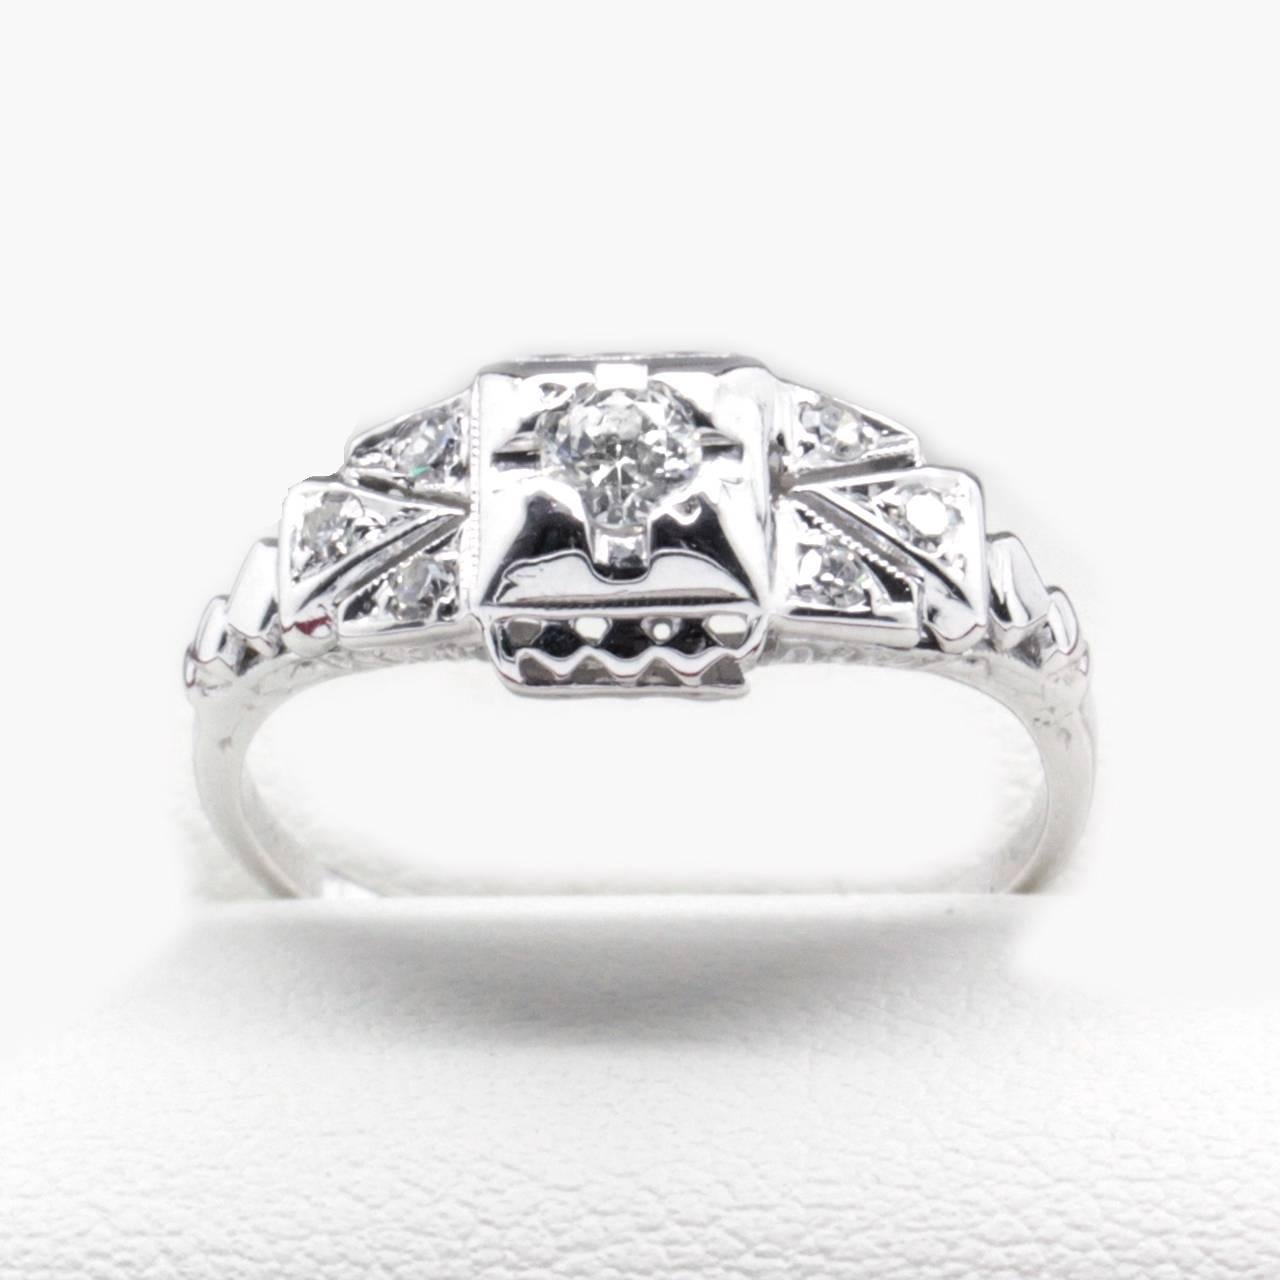 Art Deco Diamond Ring in 14k White Gold featuring diamonds weighing a total of approximately 0.20 carat.

The white gold filigree shoulders feature three small, white and very sparkly Diamonds within the adjoining triangles on either side of a